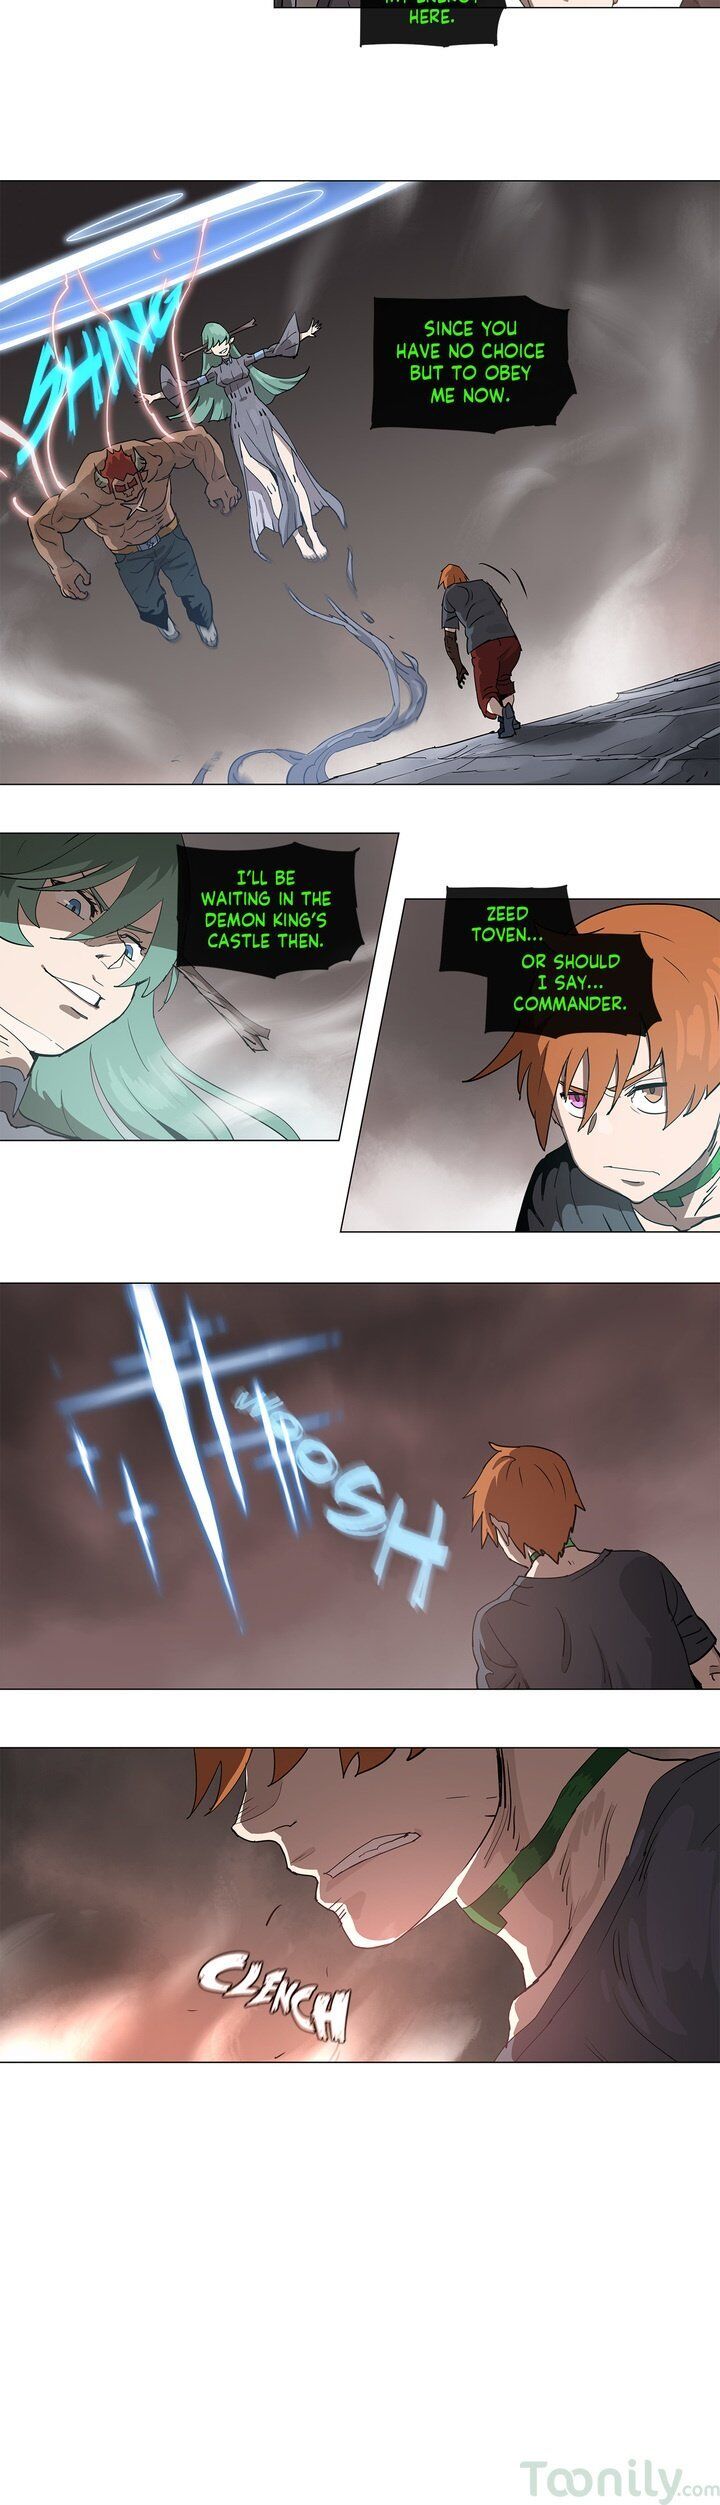 4 Cut Hero Chapter 104 page 4